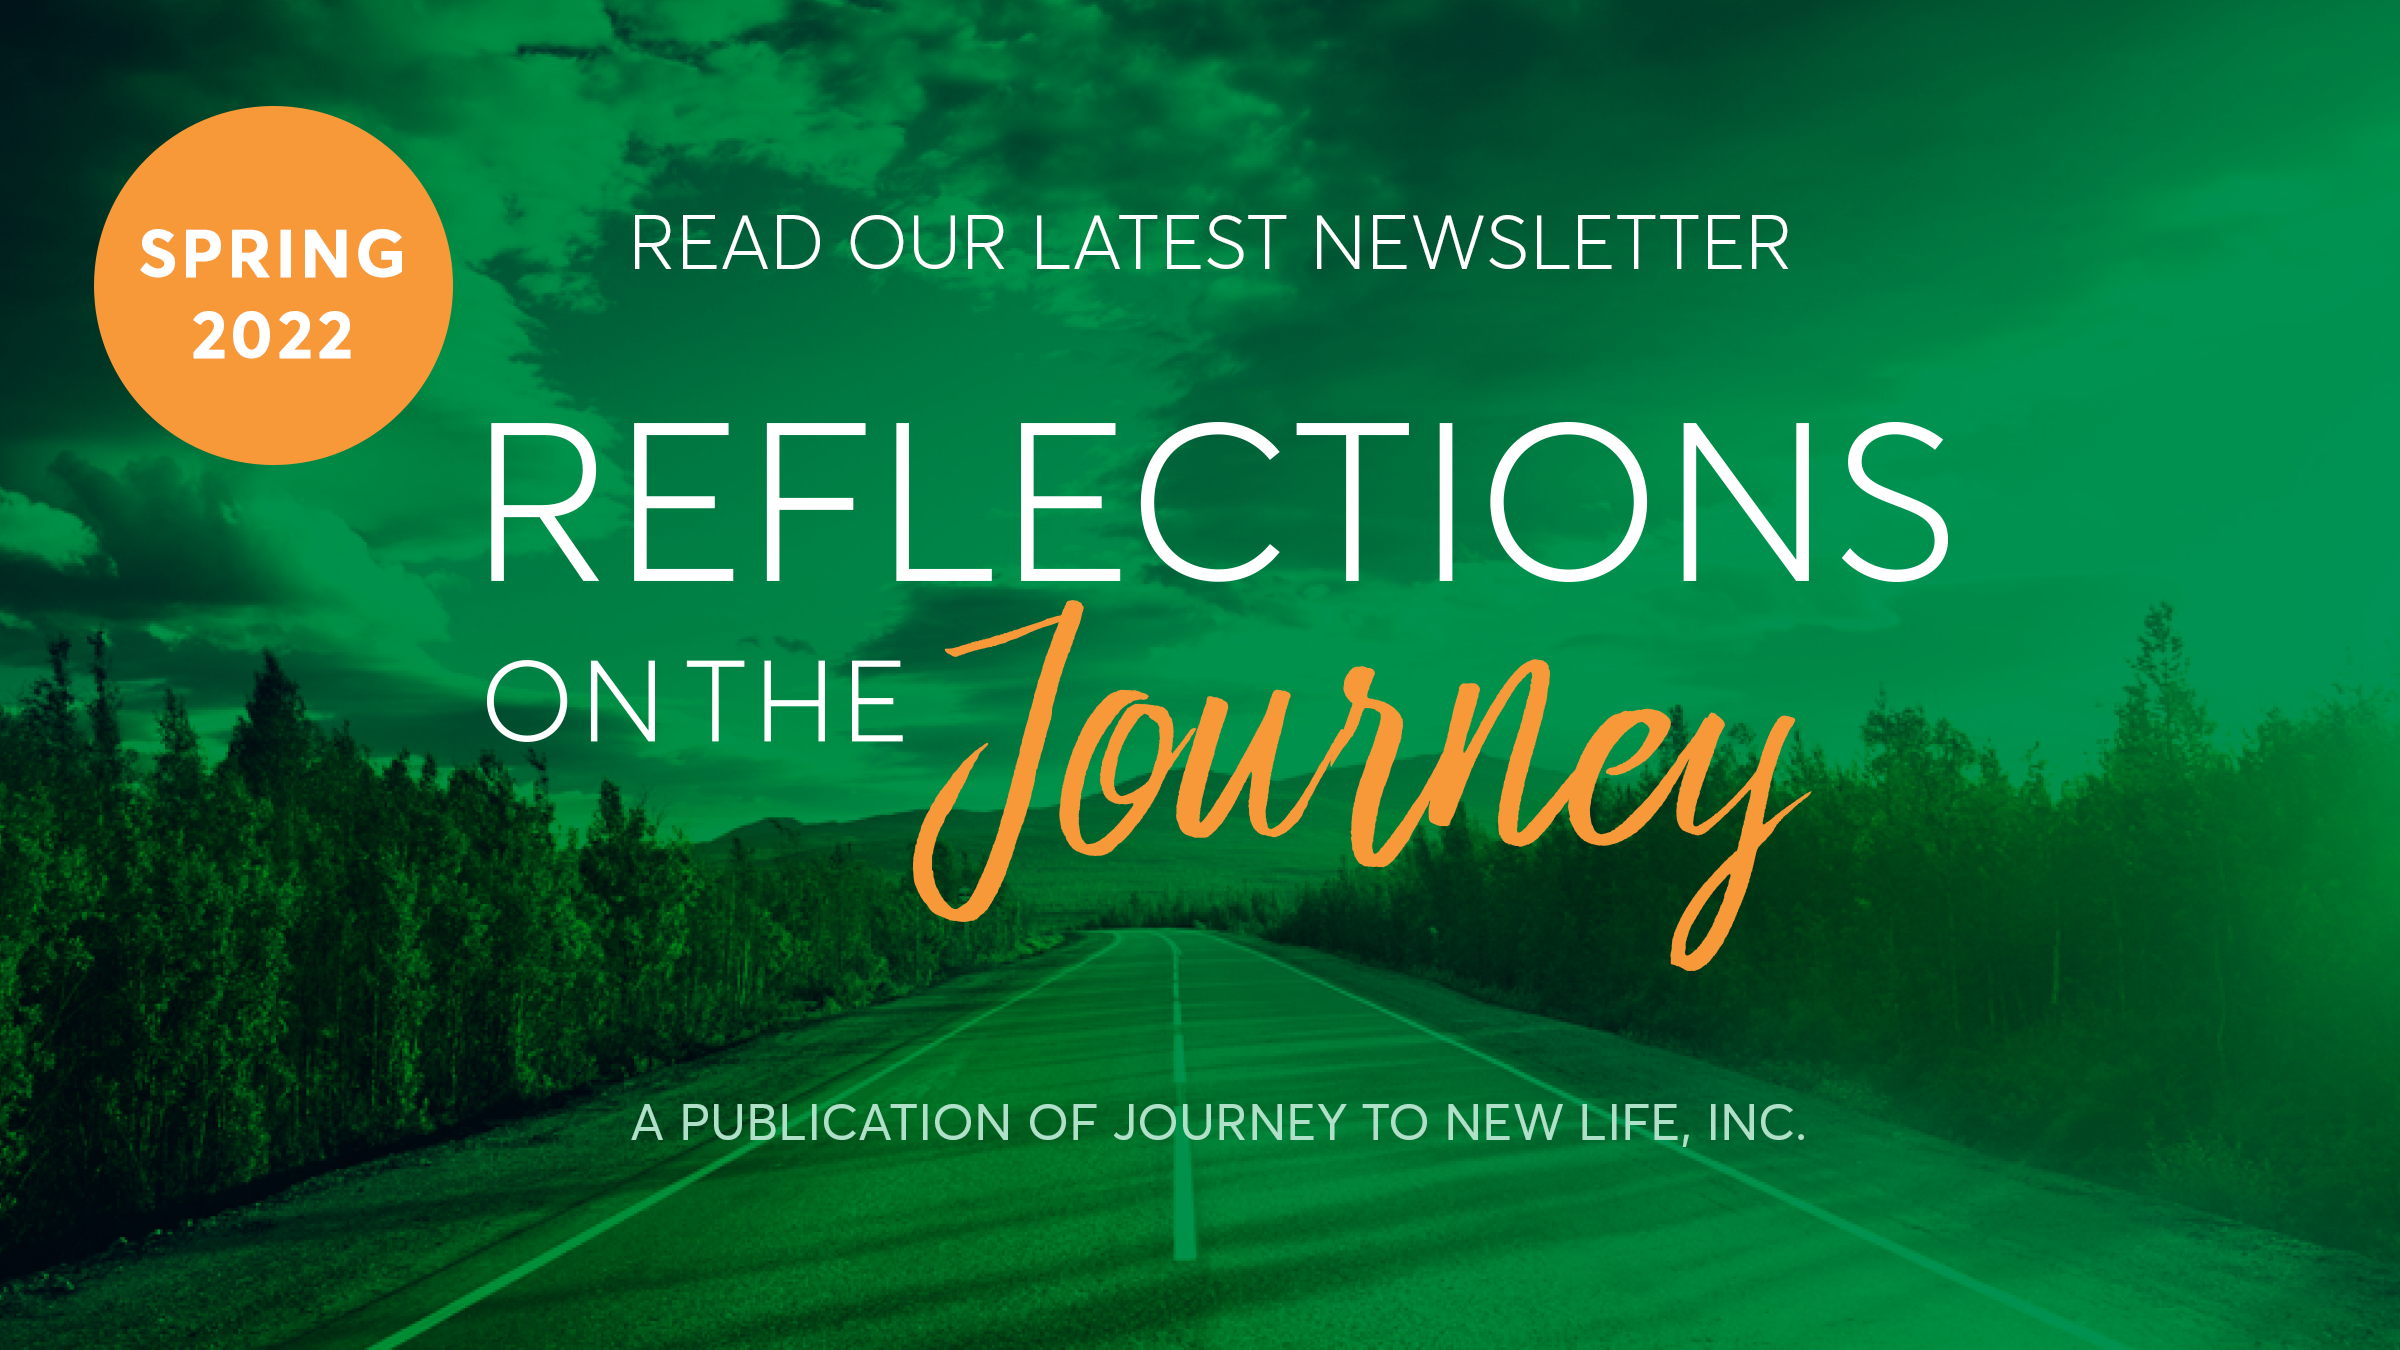 Spring 2022 - Reflections on the Journey